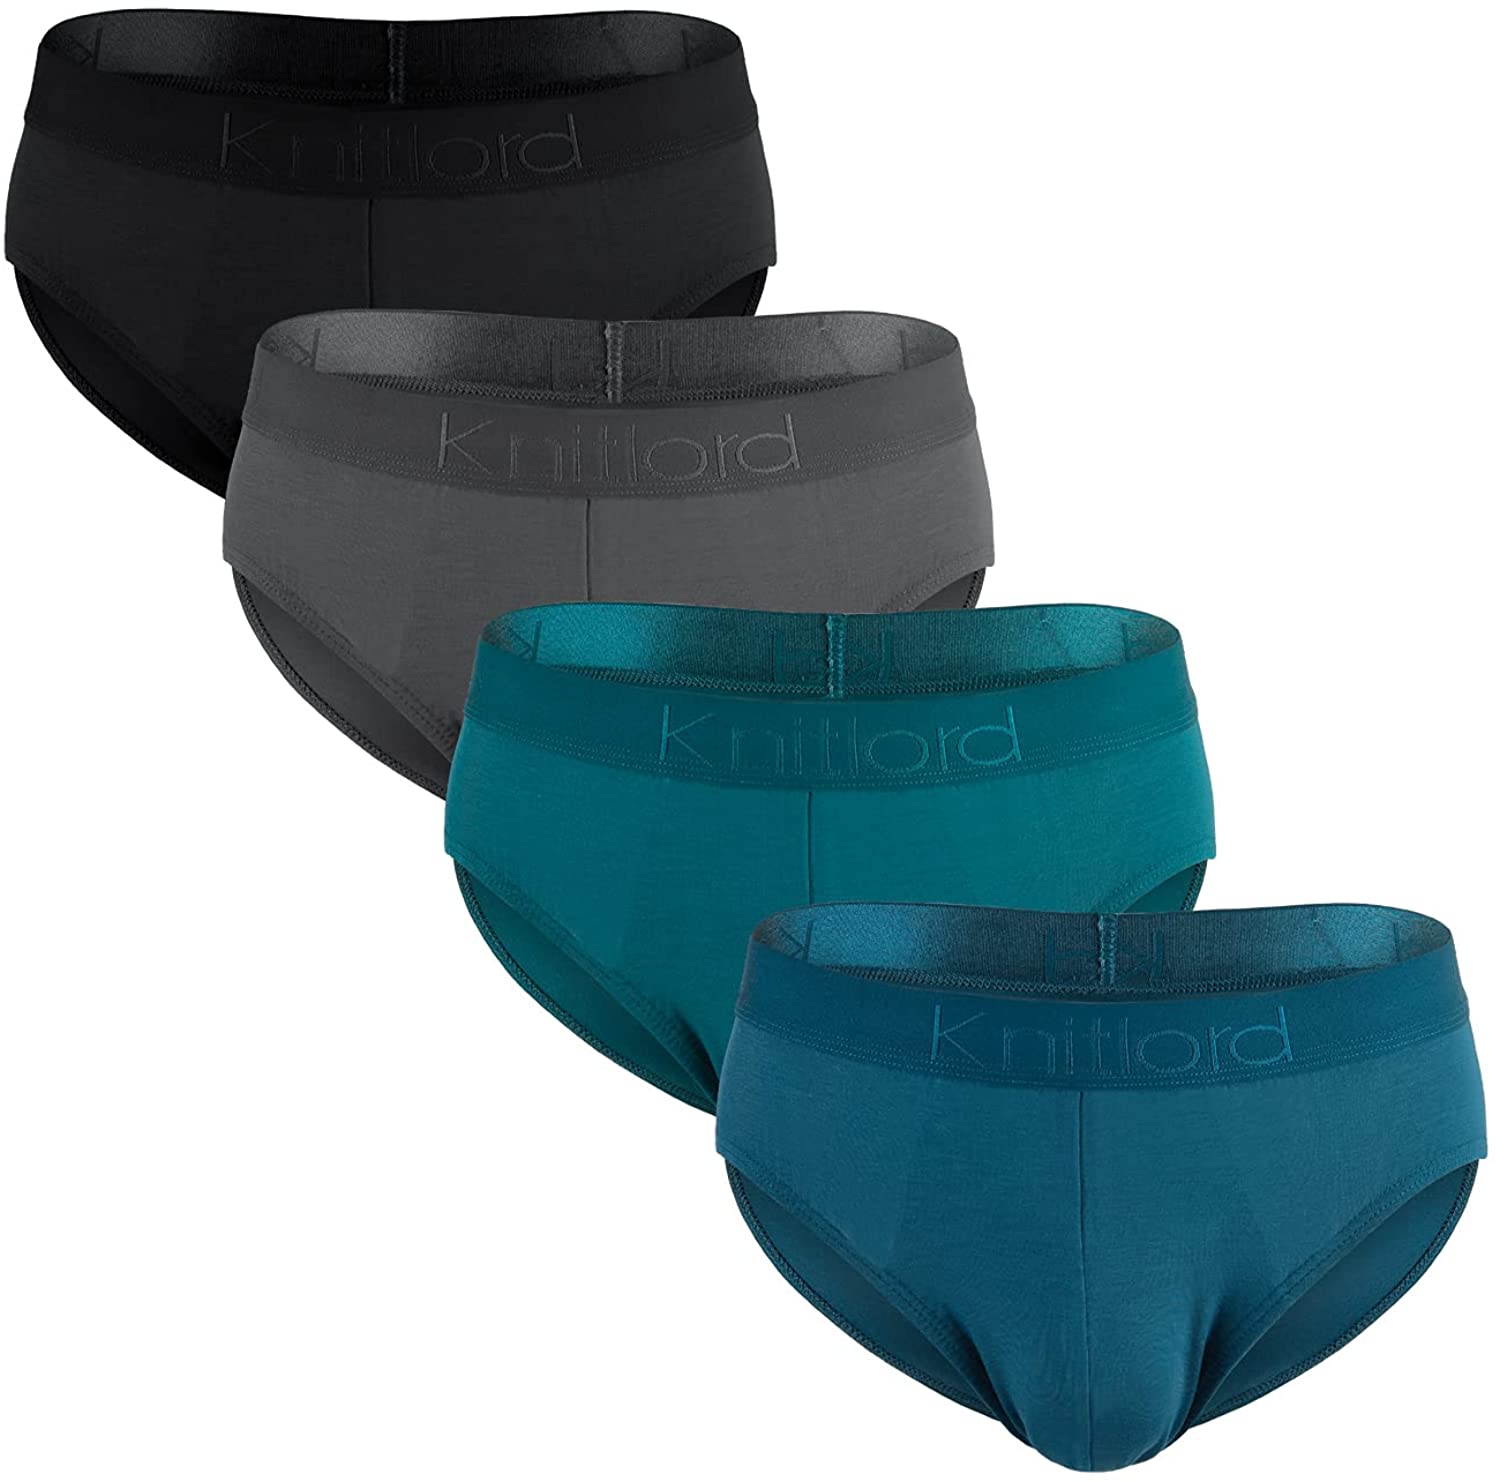 Men's Bamboo Underwear Soft Lightweight Mid/Low Rise Briefs 3 or 4 Pack